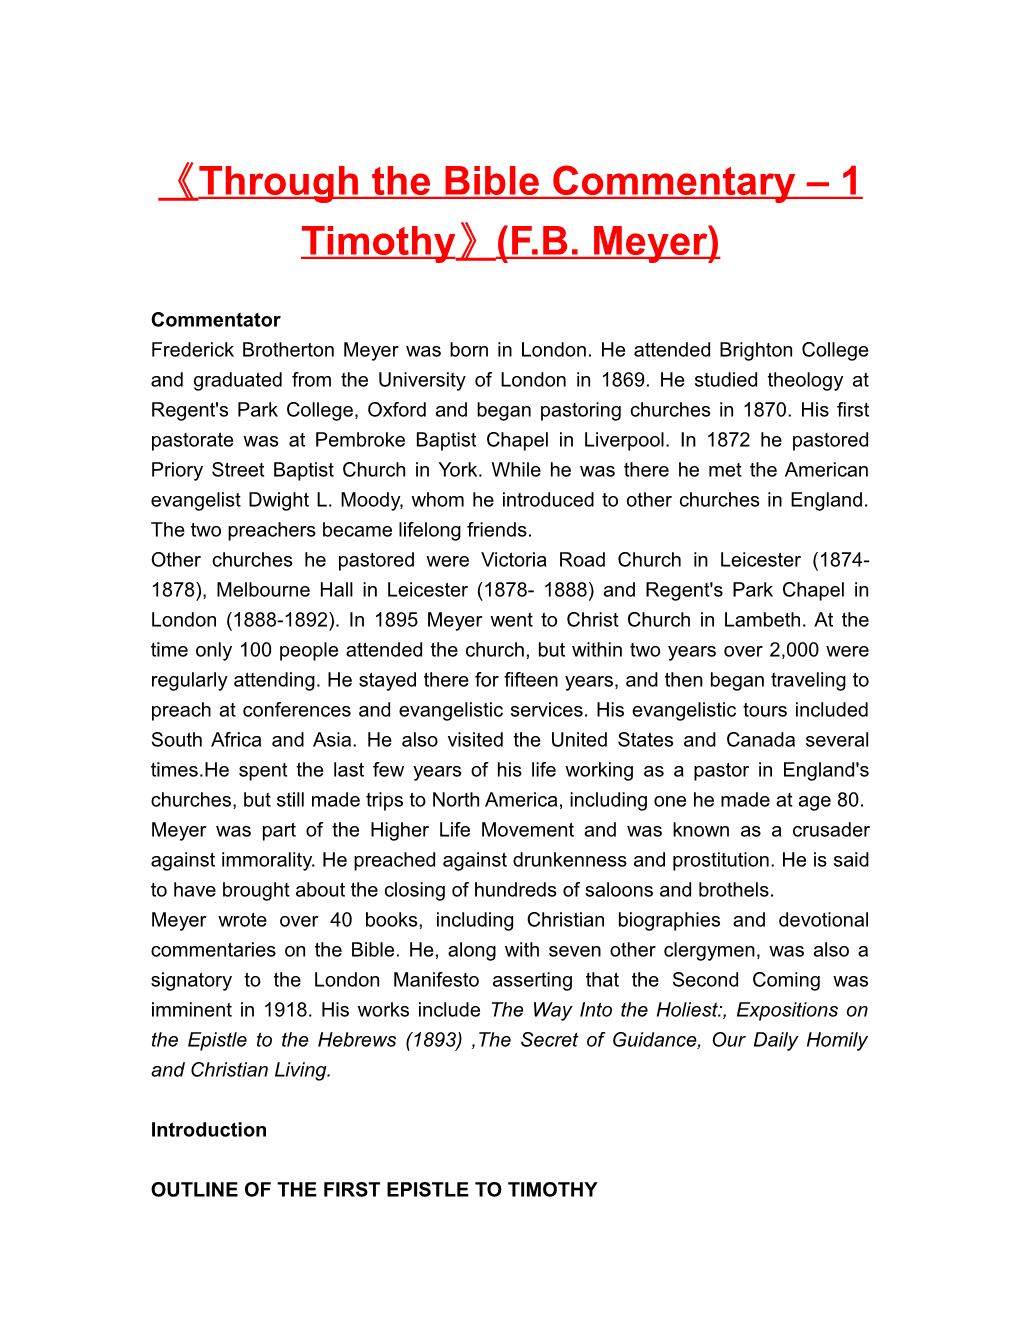 Through the Bible Commentary 1 Timothy (F.B. Meyer)